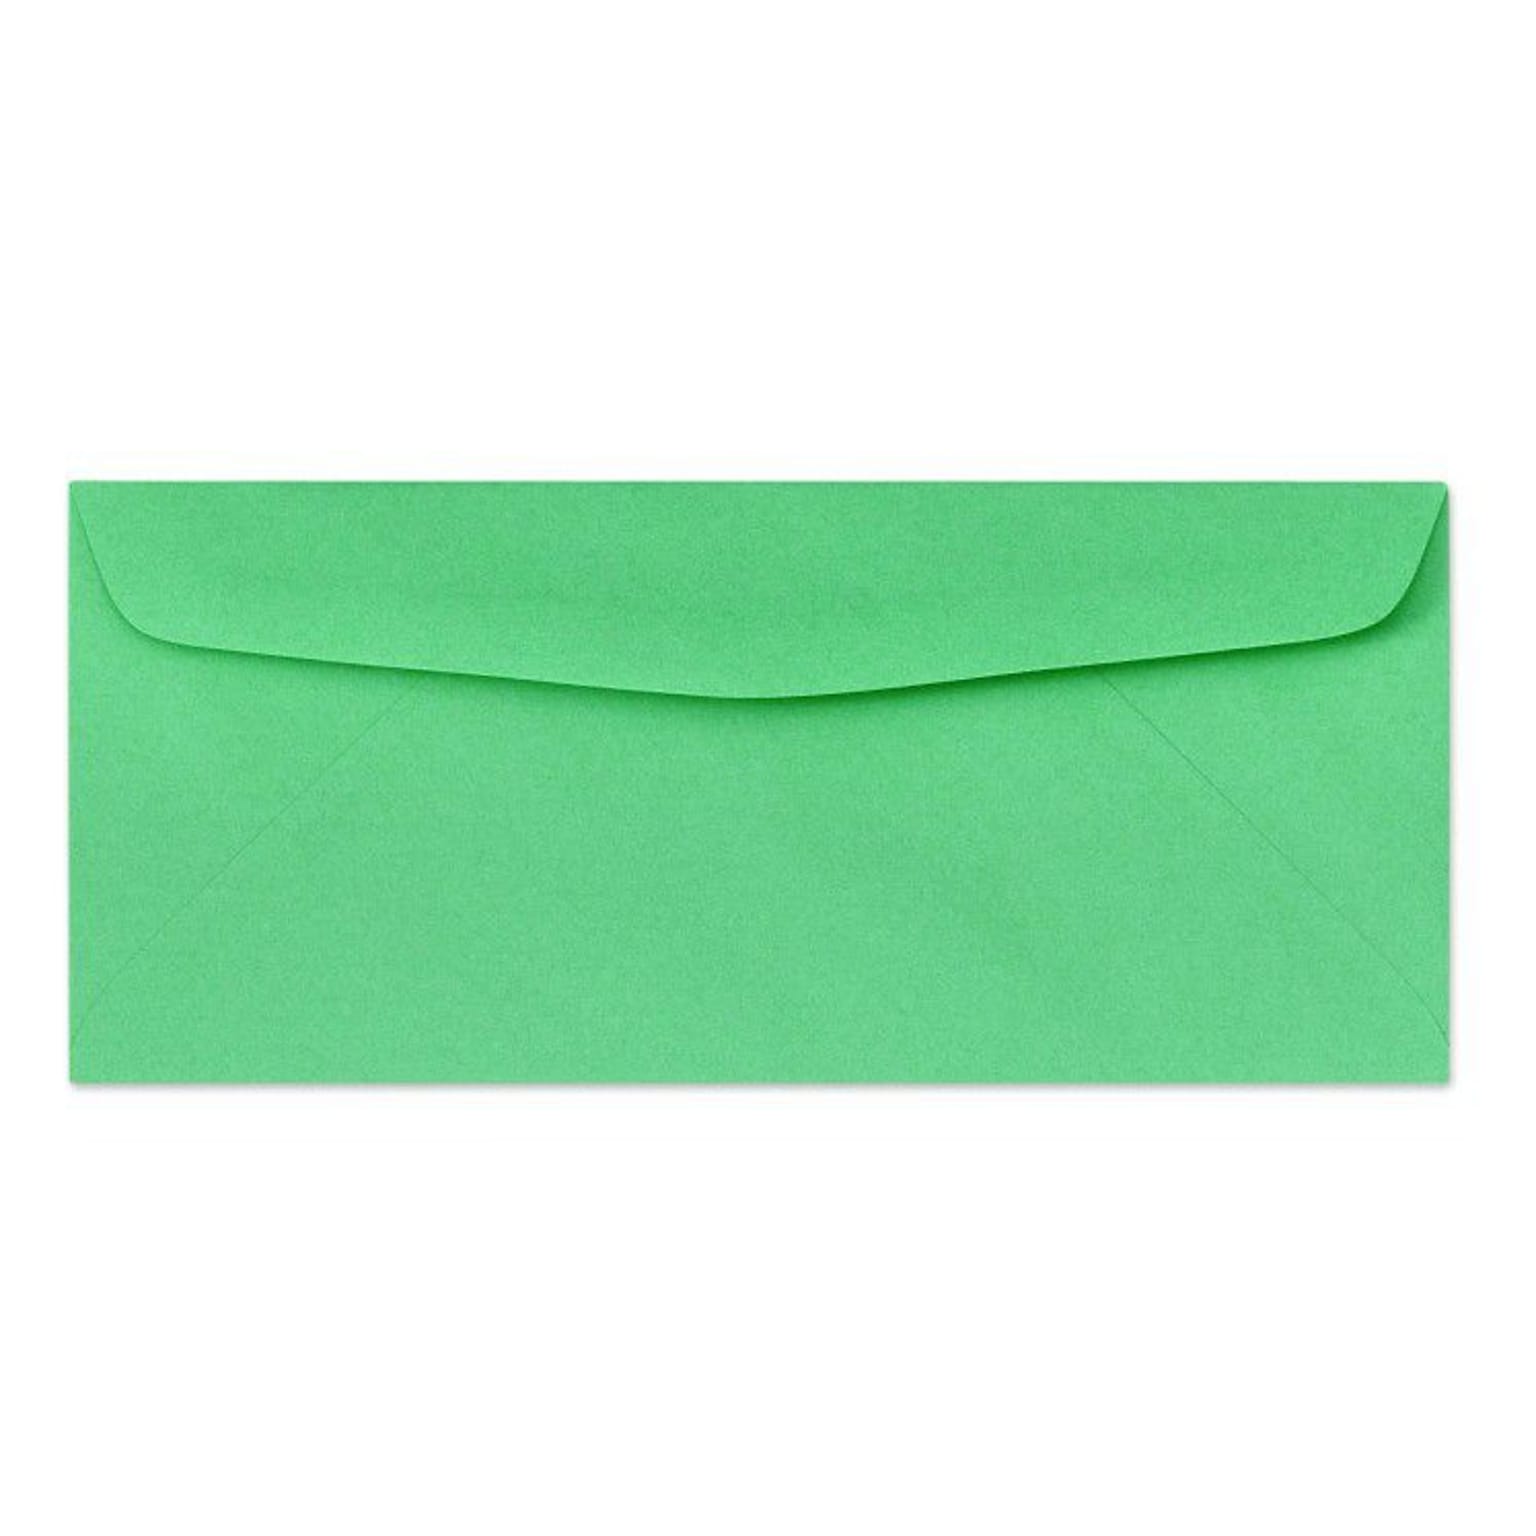 LUX Moistenable Glue Security Tinted #10 Business Envelope, 4 1/2 x 9 1/2, Bright Green, 500/Box (4260-12-500)